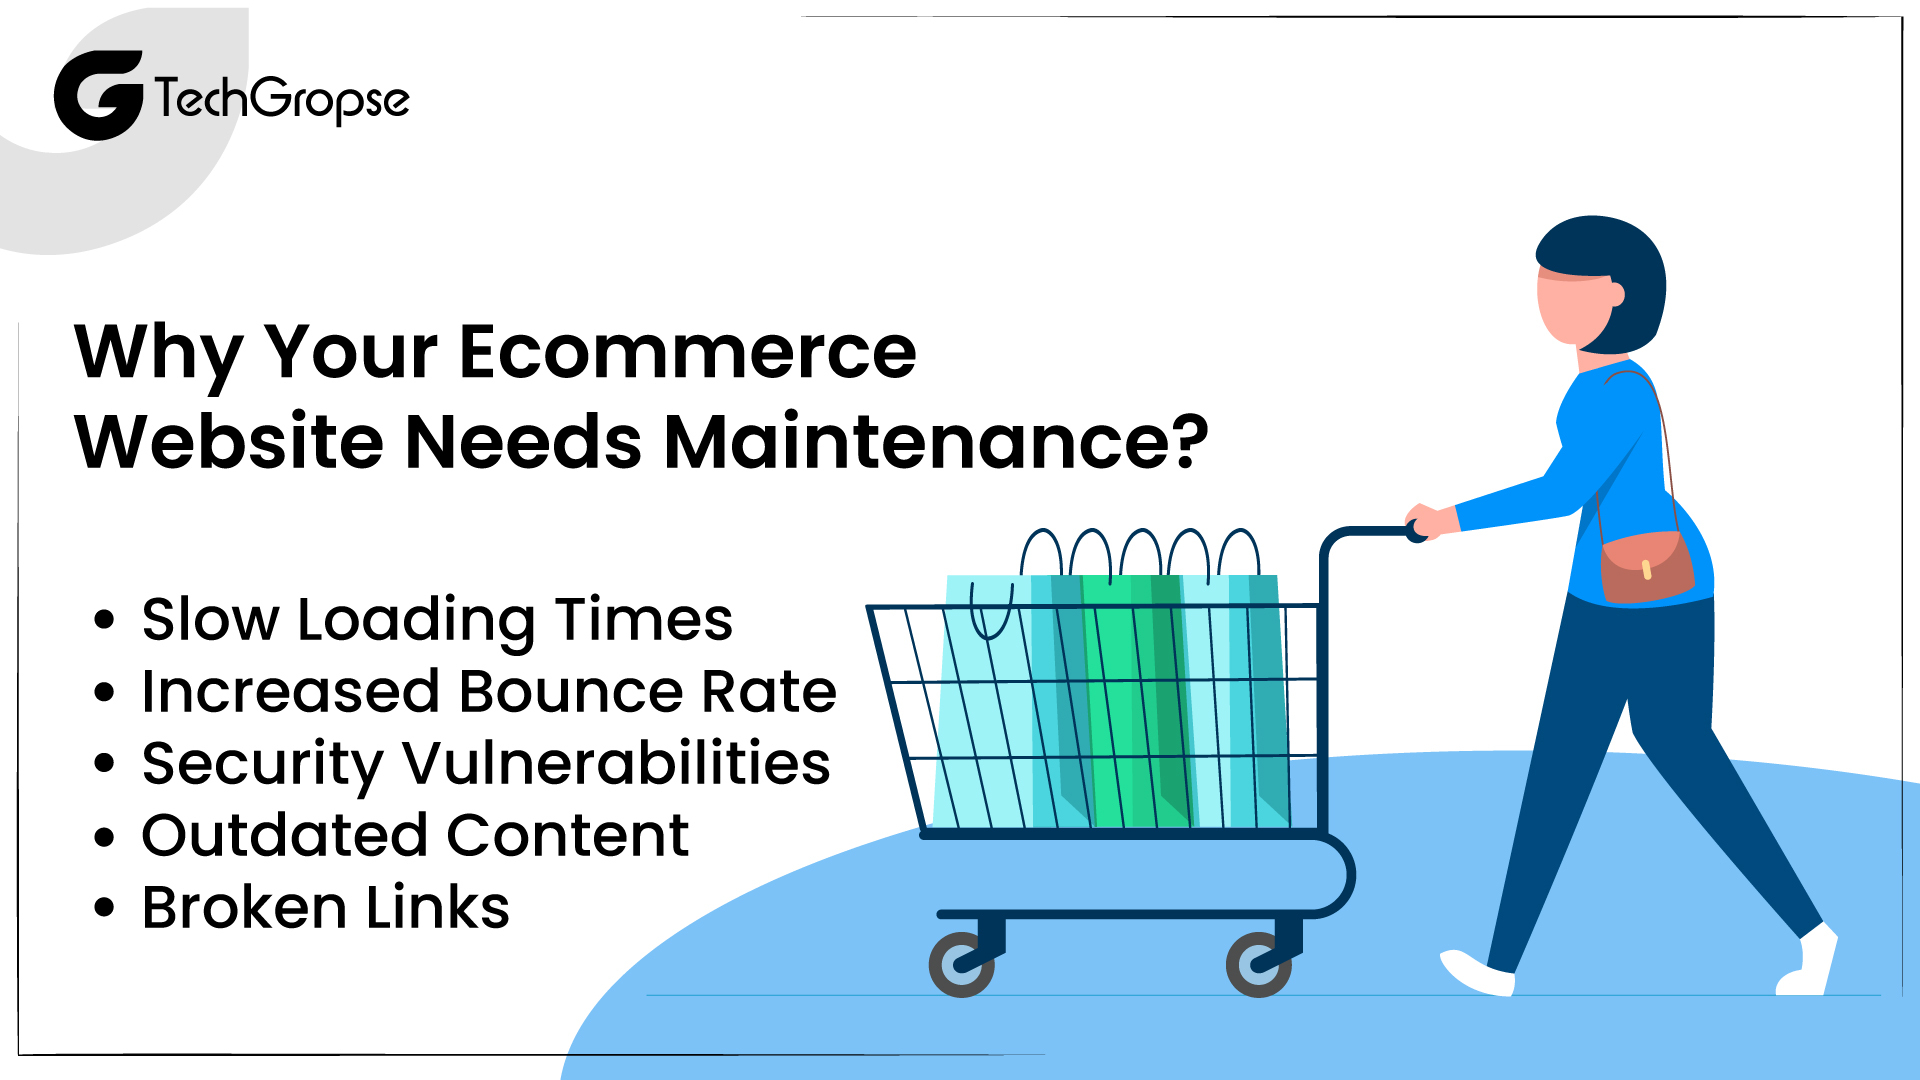 Why Your Ecommerce Website Needs Maintenance?